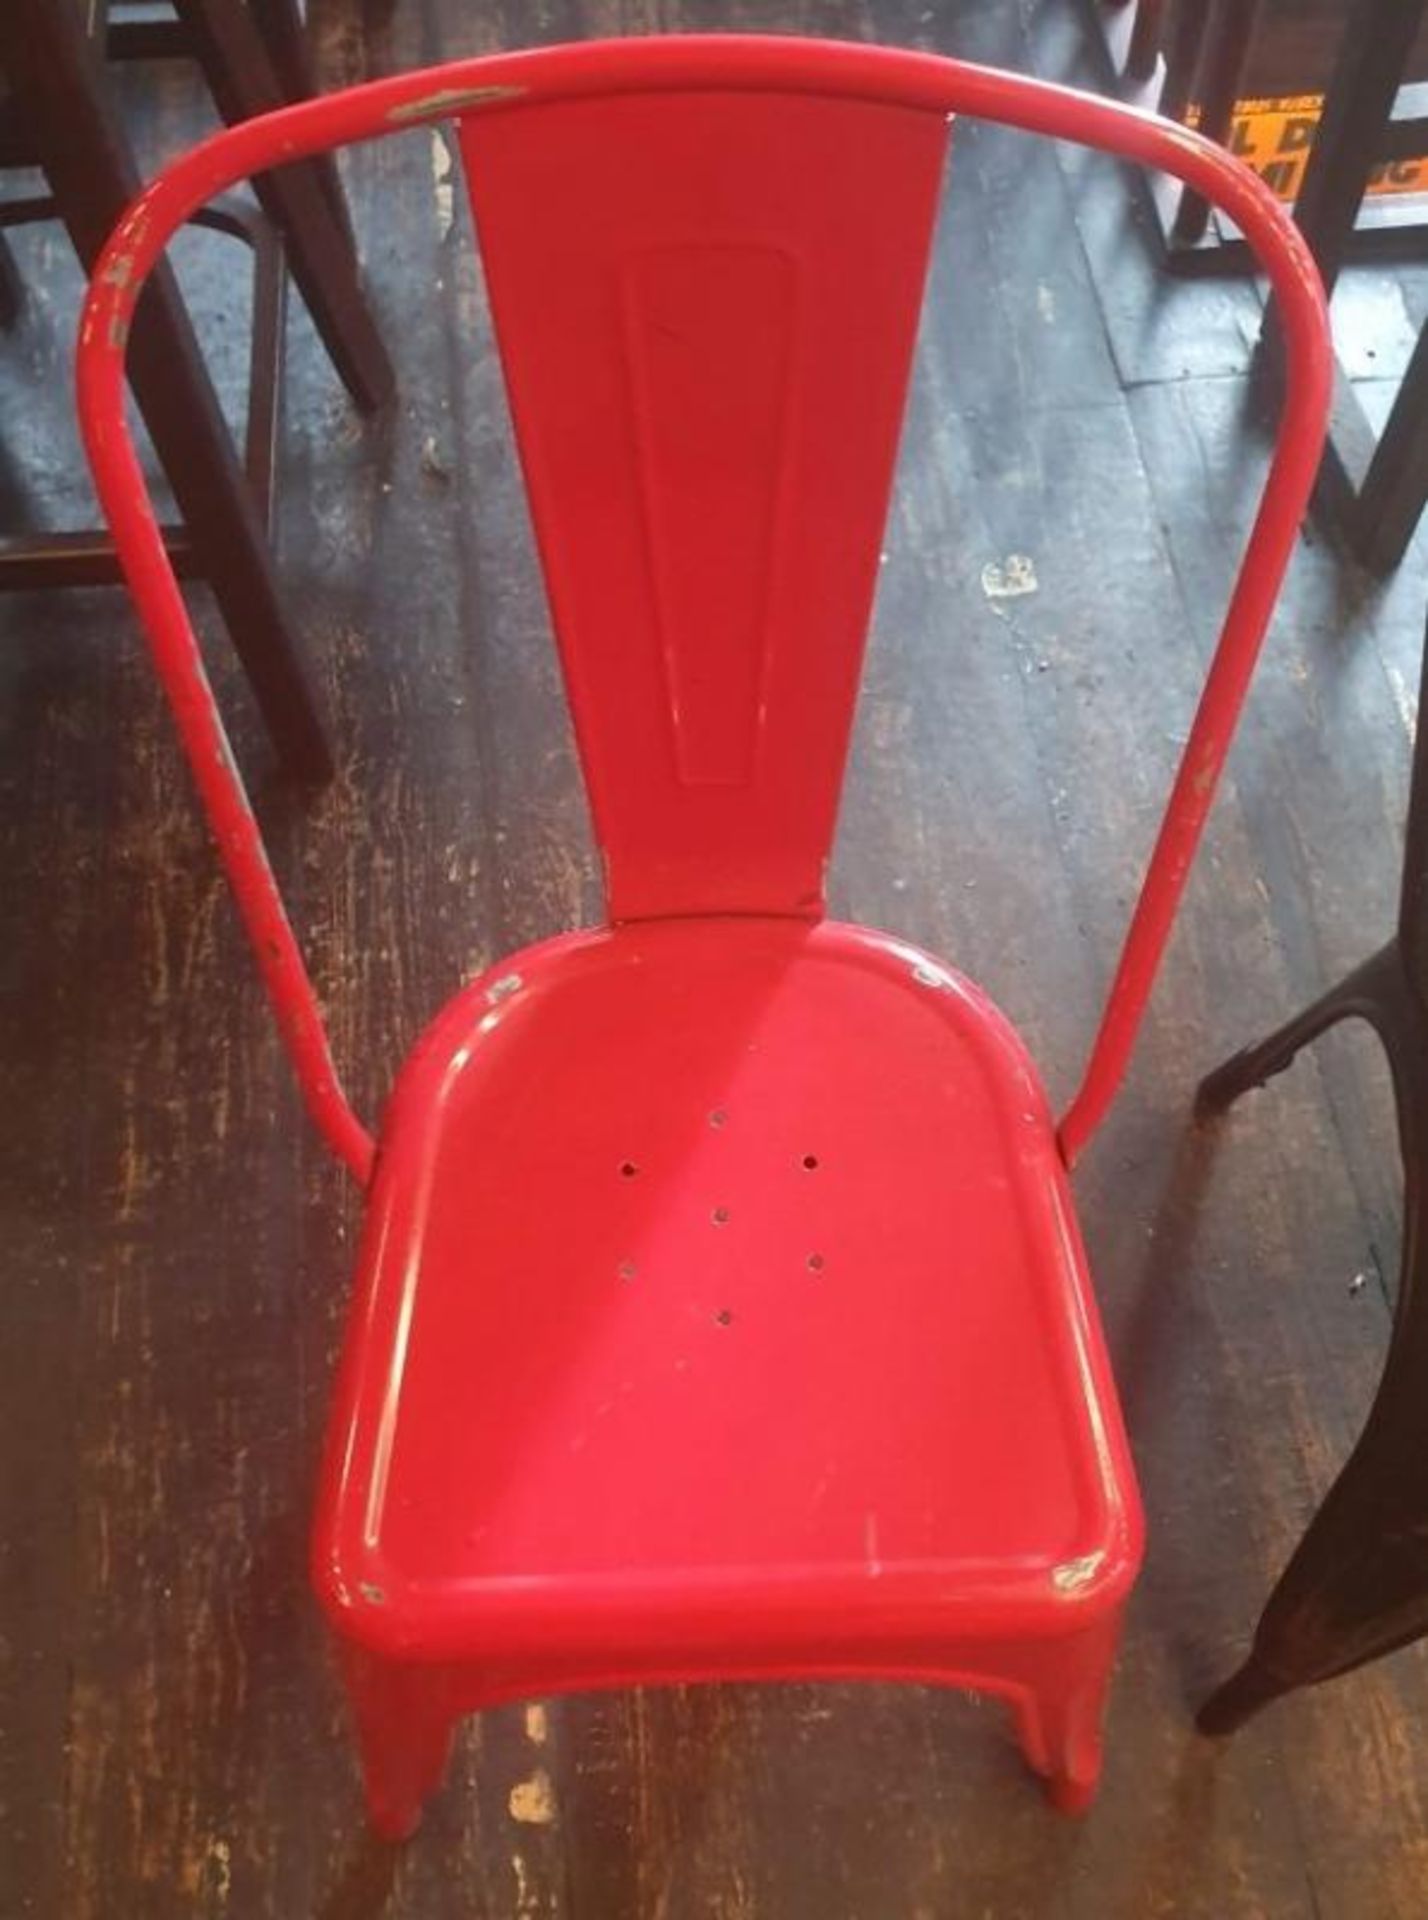 6 x Assorted Rustic Metal Bistro Chairs - Includes 2 x In Red, And 4 x In Black - Recently Taken Fro - Image 3 of 5